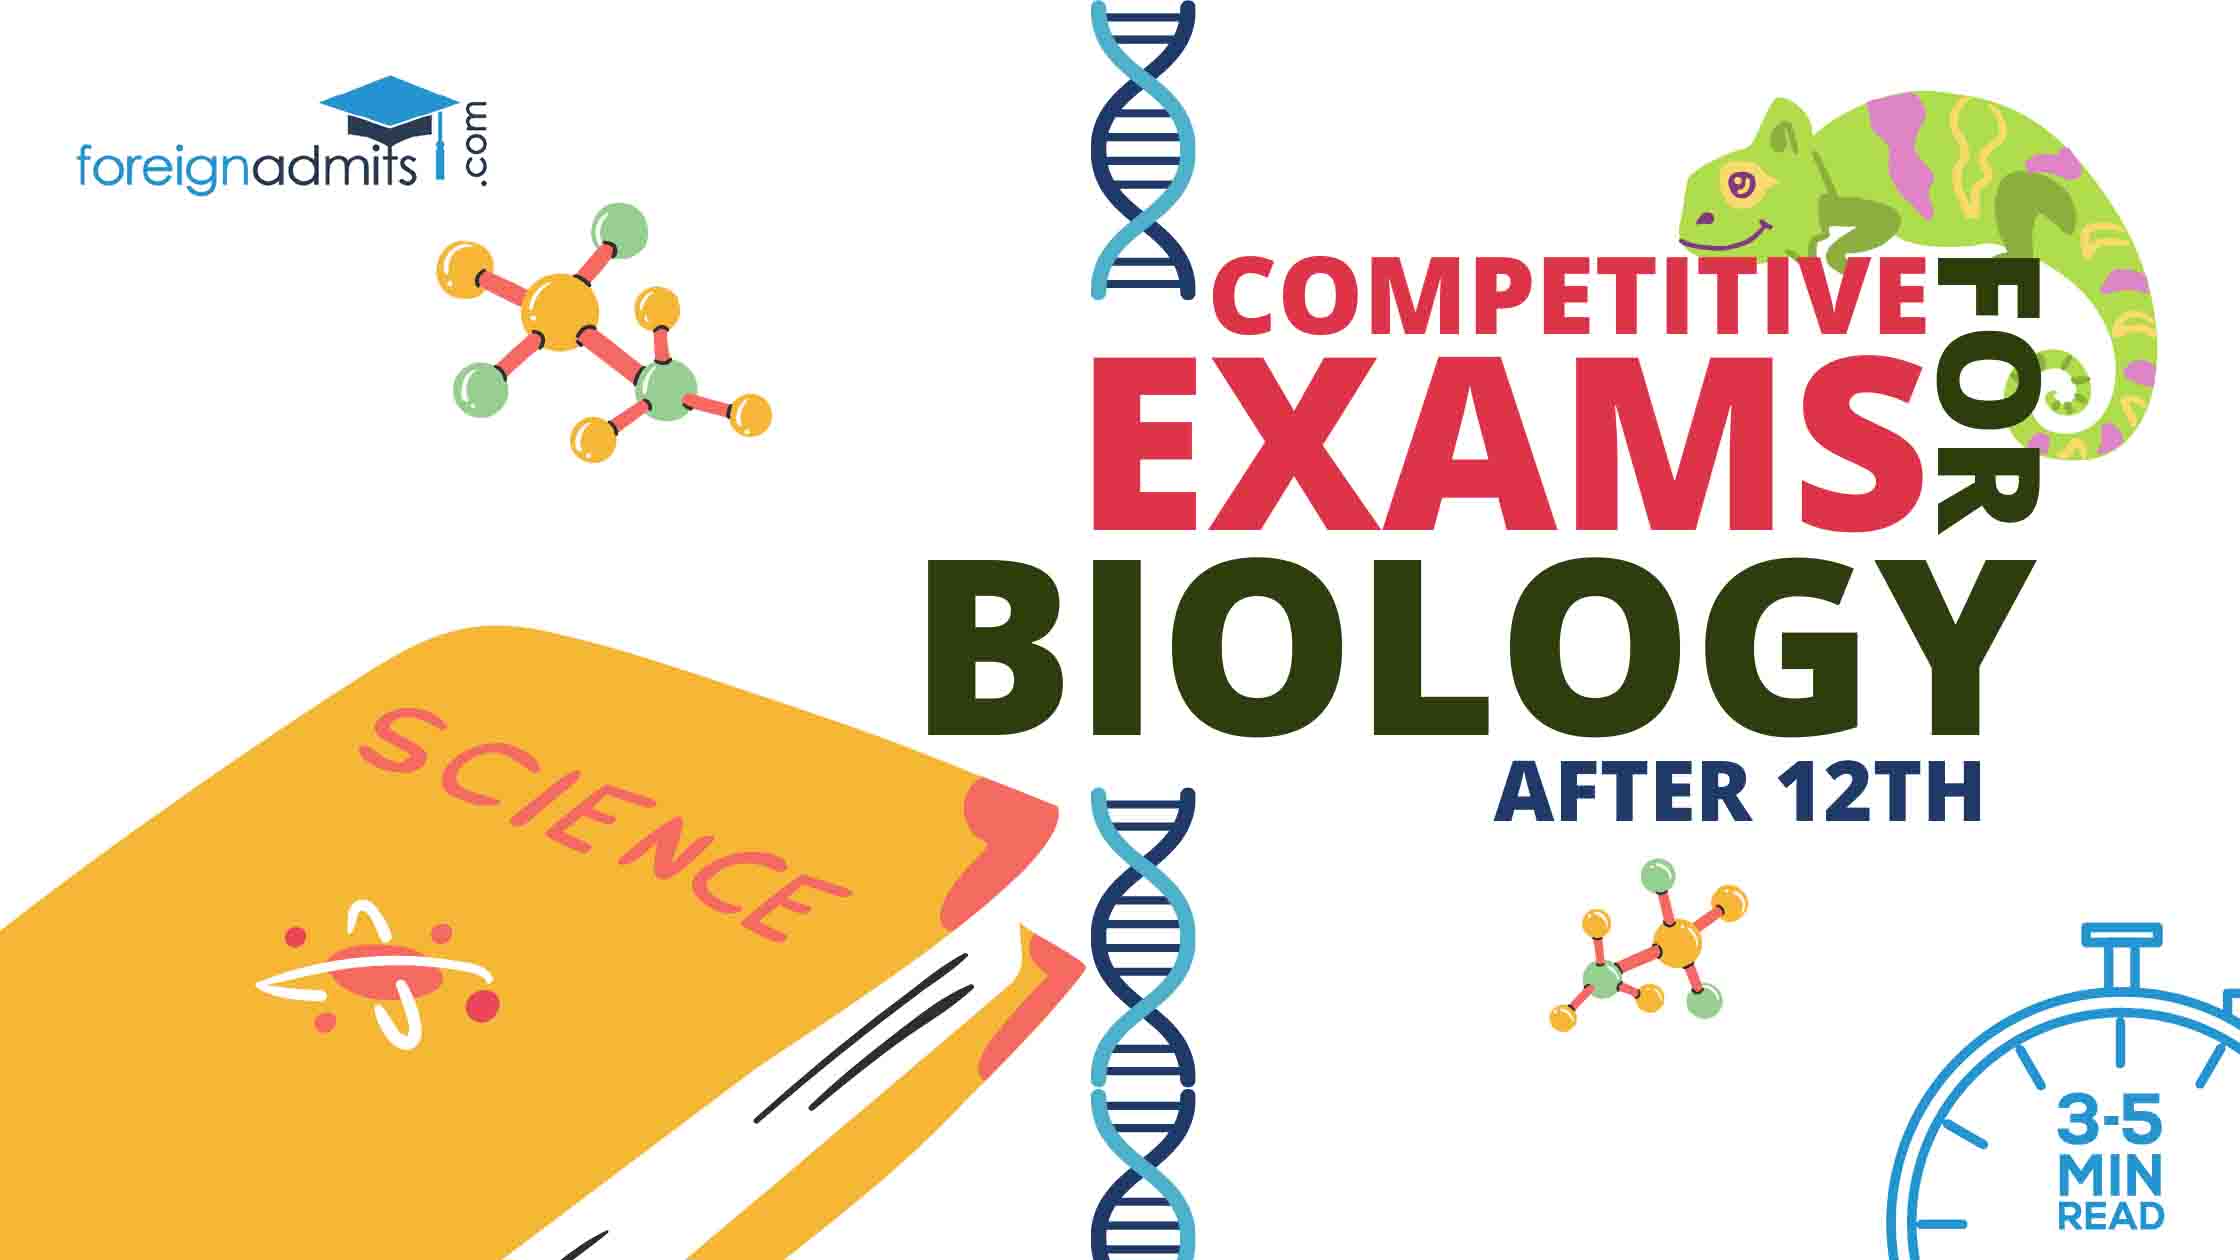 Competitive Exams for Biology Students after 12th